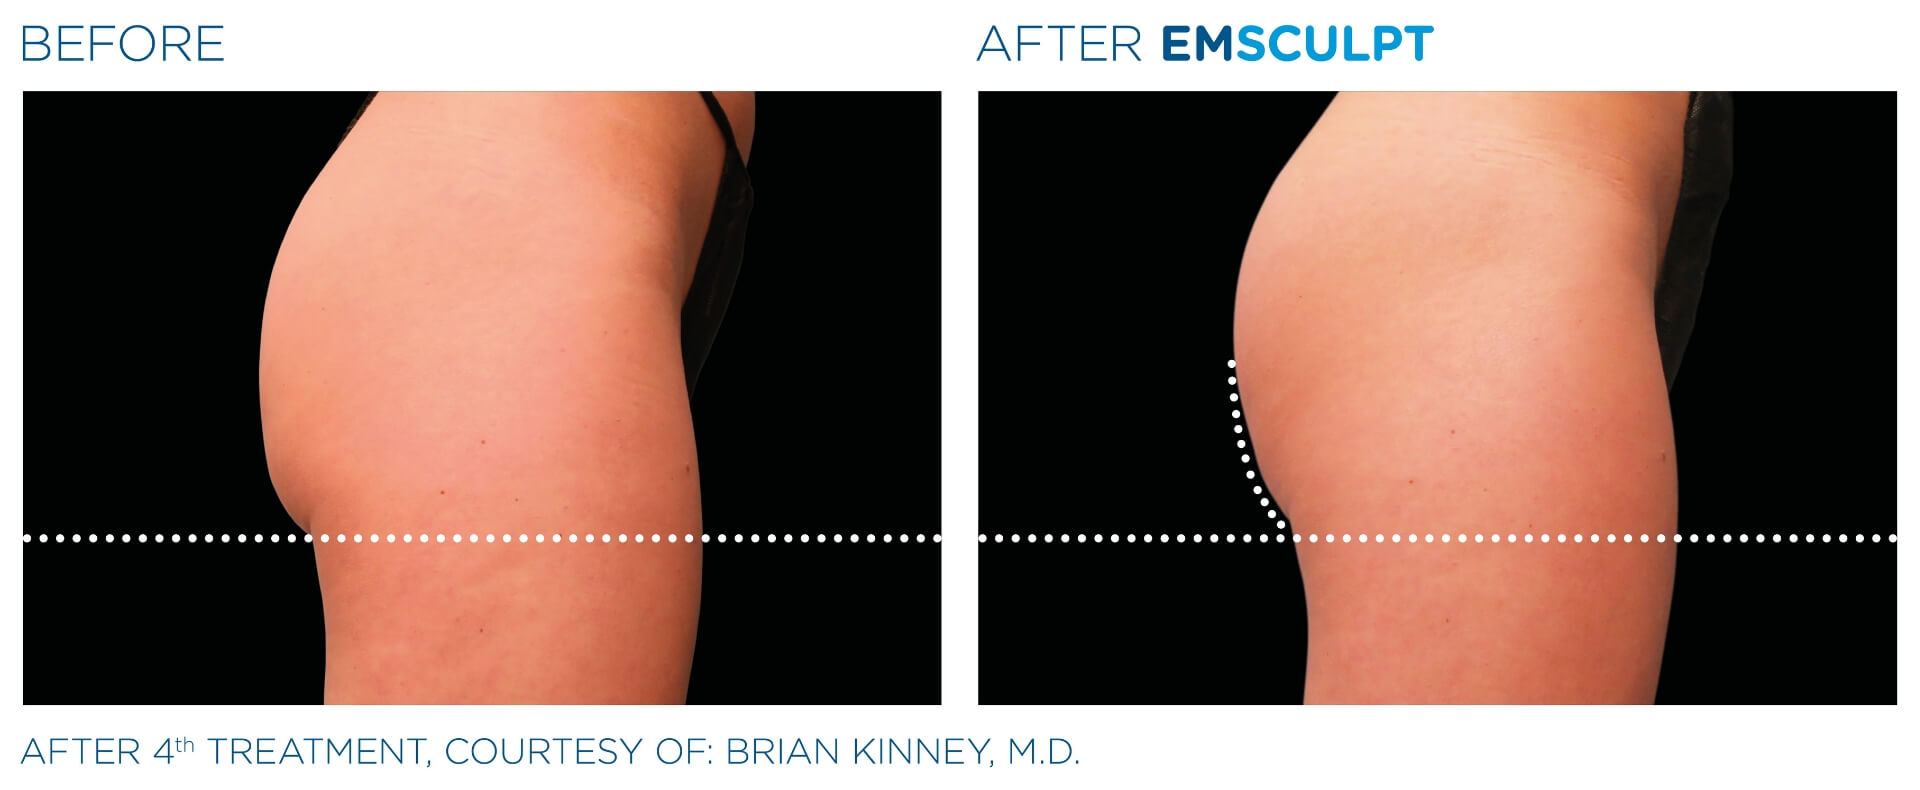 Before and after results for EMSCULPT